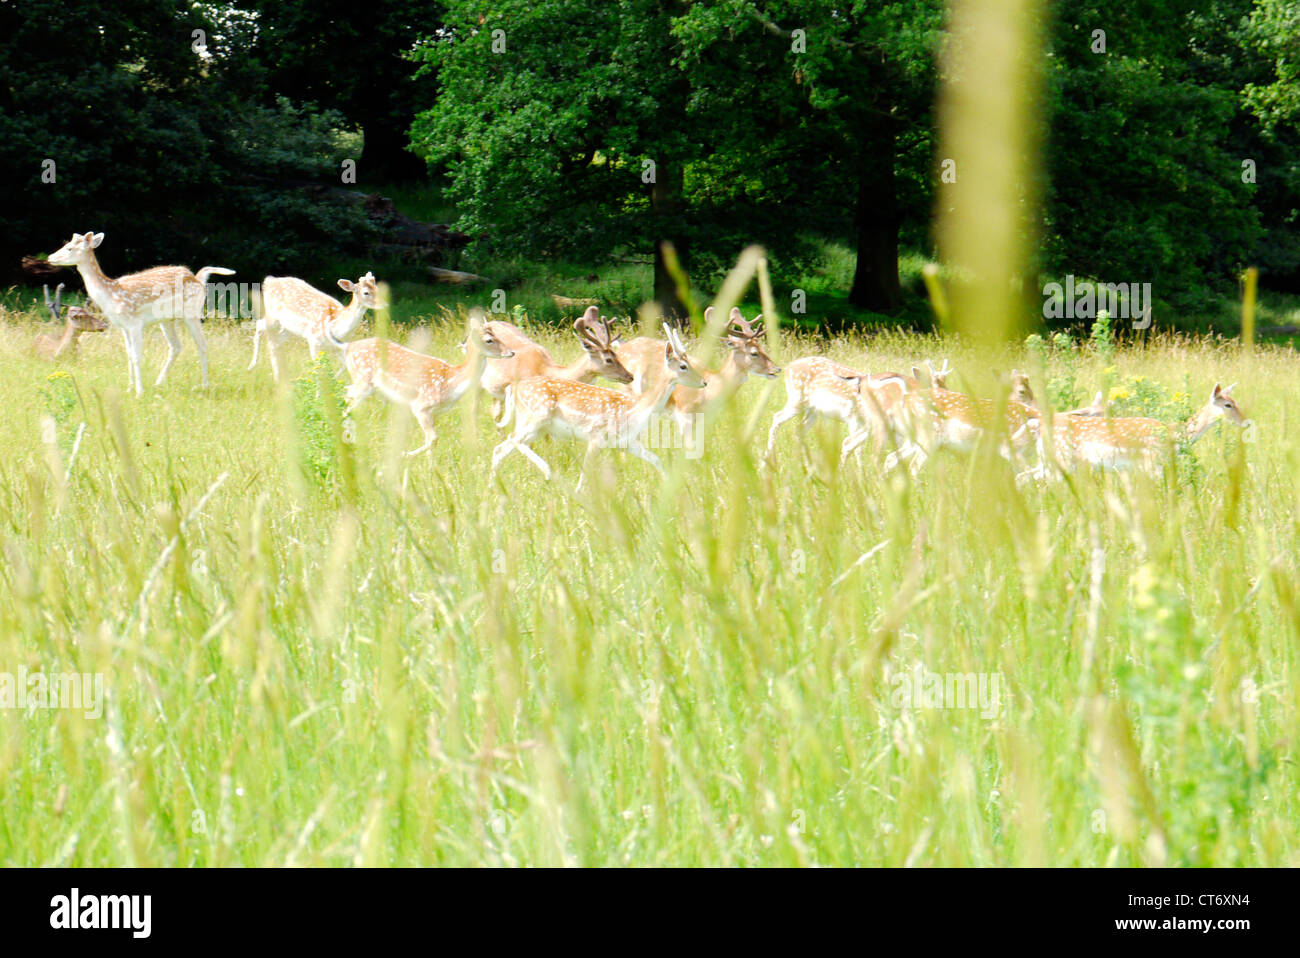 Deer running through long grass.  The focus is on the deer but the grass is deliberately blurred in front. Stock Photo